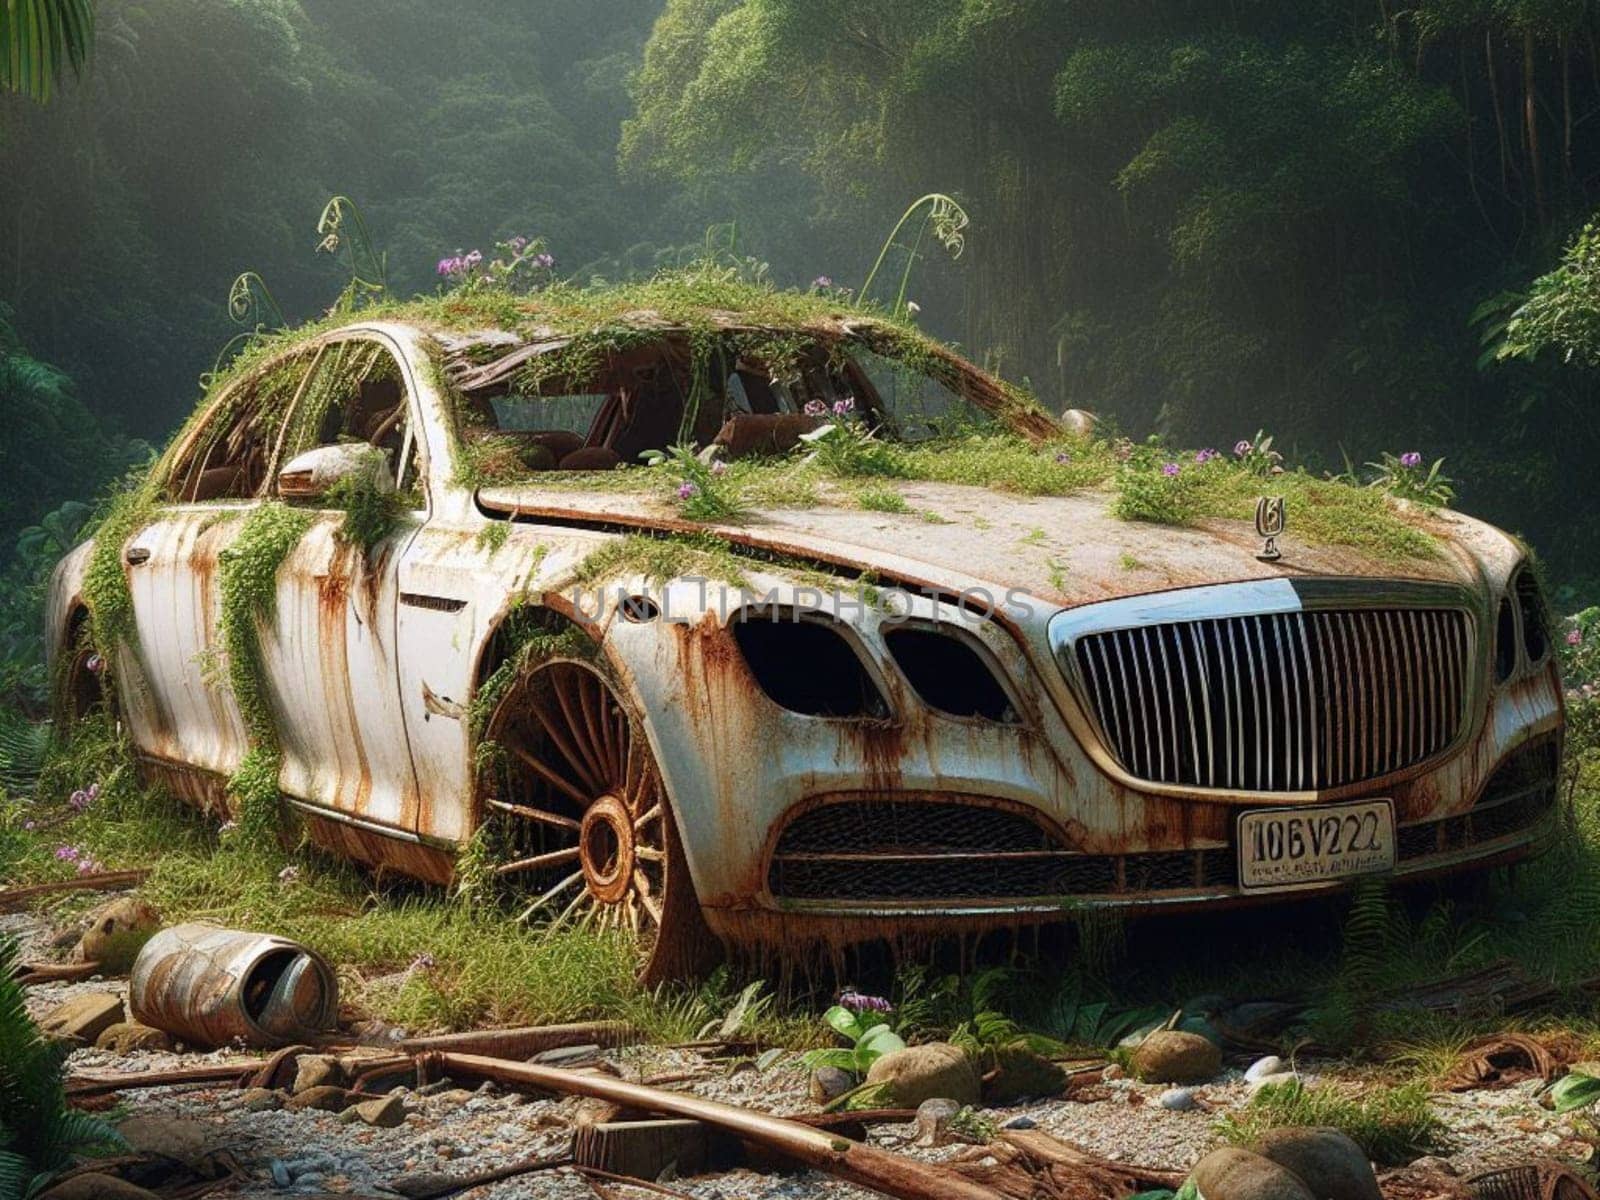 Abandoned rusty expensive atmospheric deluxe sedan car limo as circulation banned for co2 emission 2030 agenda , severe damage, broken parts, plants overgrowth bloom flowers. ai generated